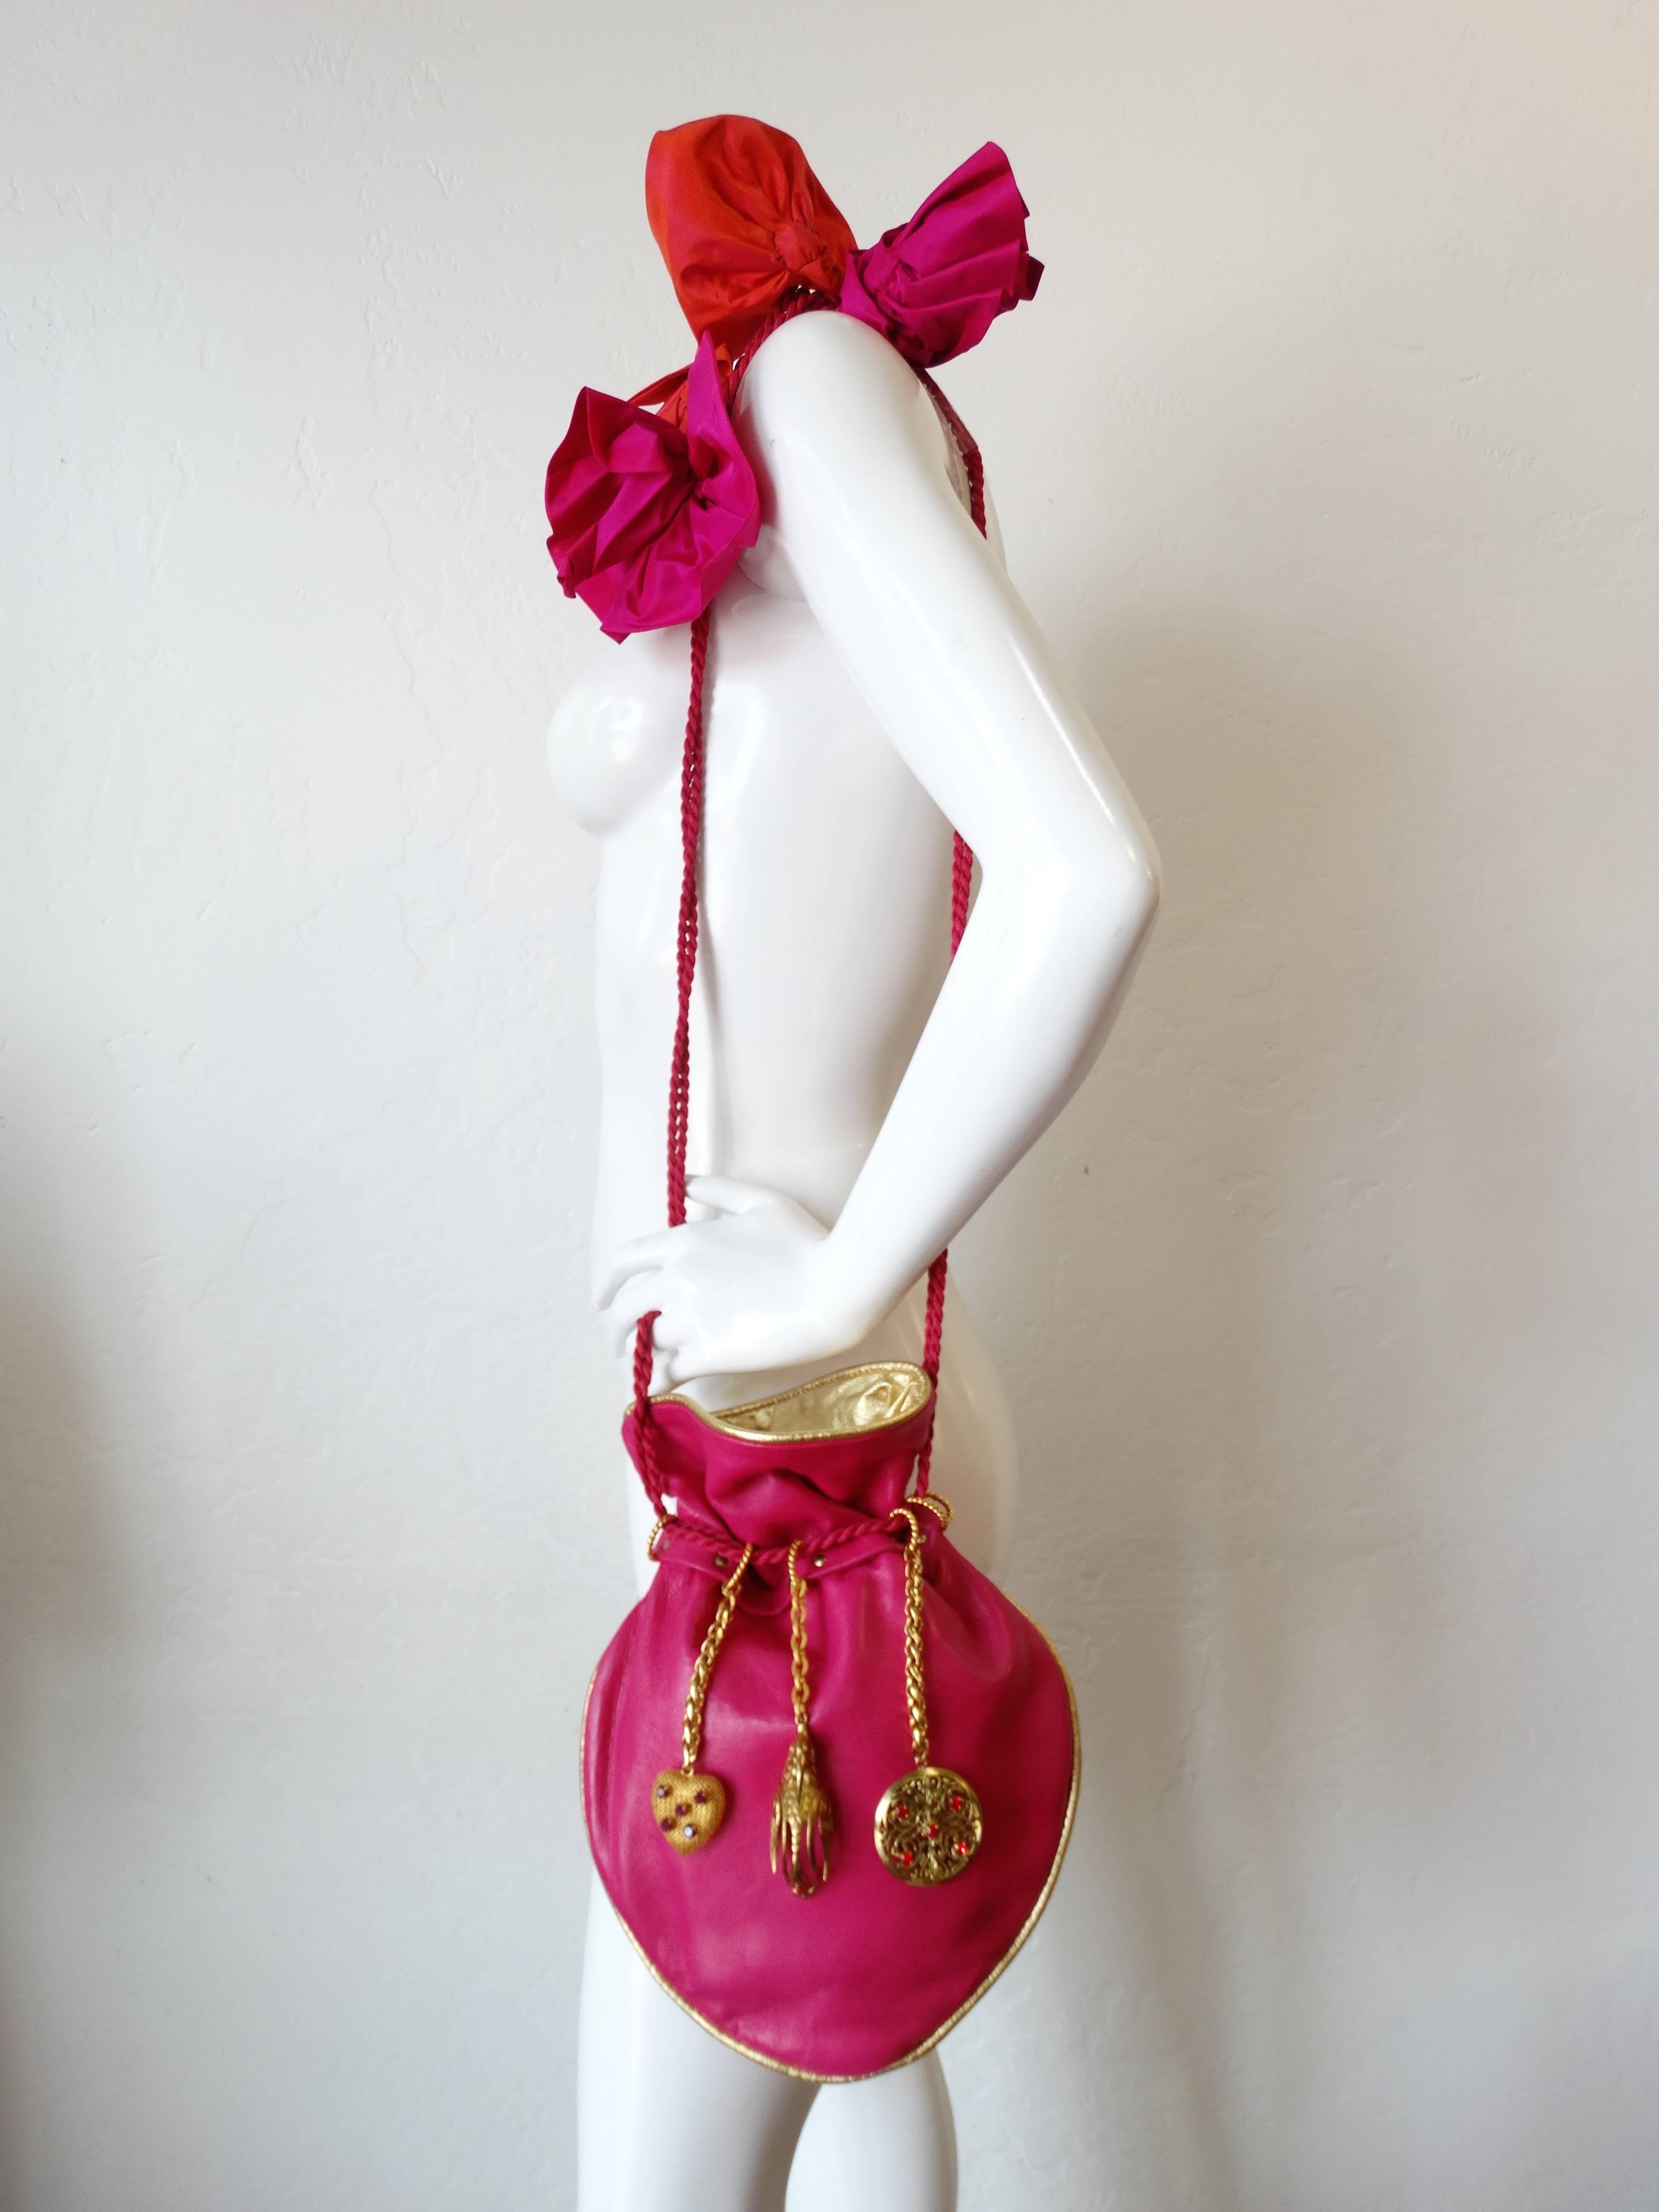 Early 1990's Dominique Aurientis Charmed Handbag From Bullocks Wilshire. This is a Runway Couture leather charm handbag!  Has never been out on the town to show off it's unconventional, but funky and fun style.  Hanging bobbles, fabric flower